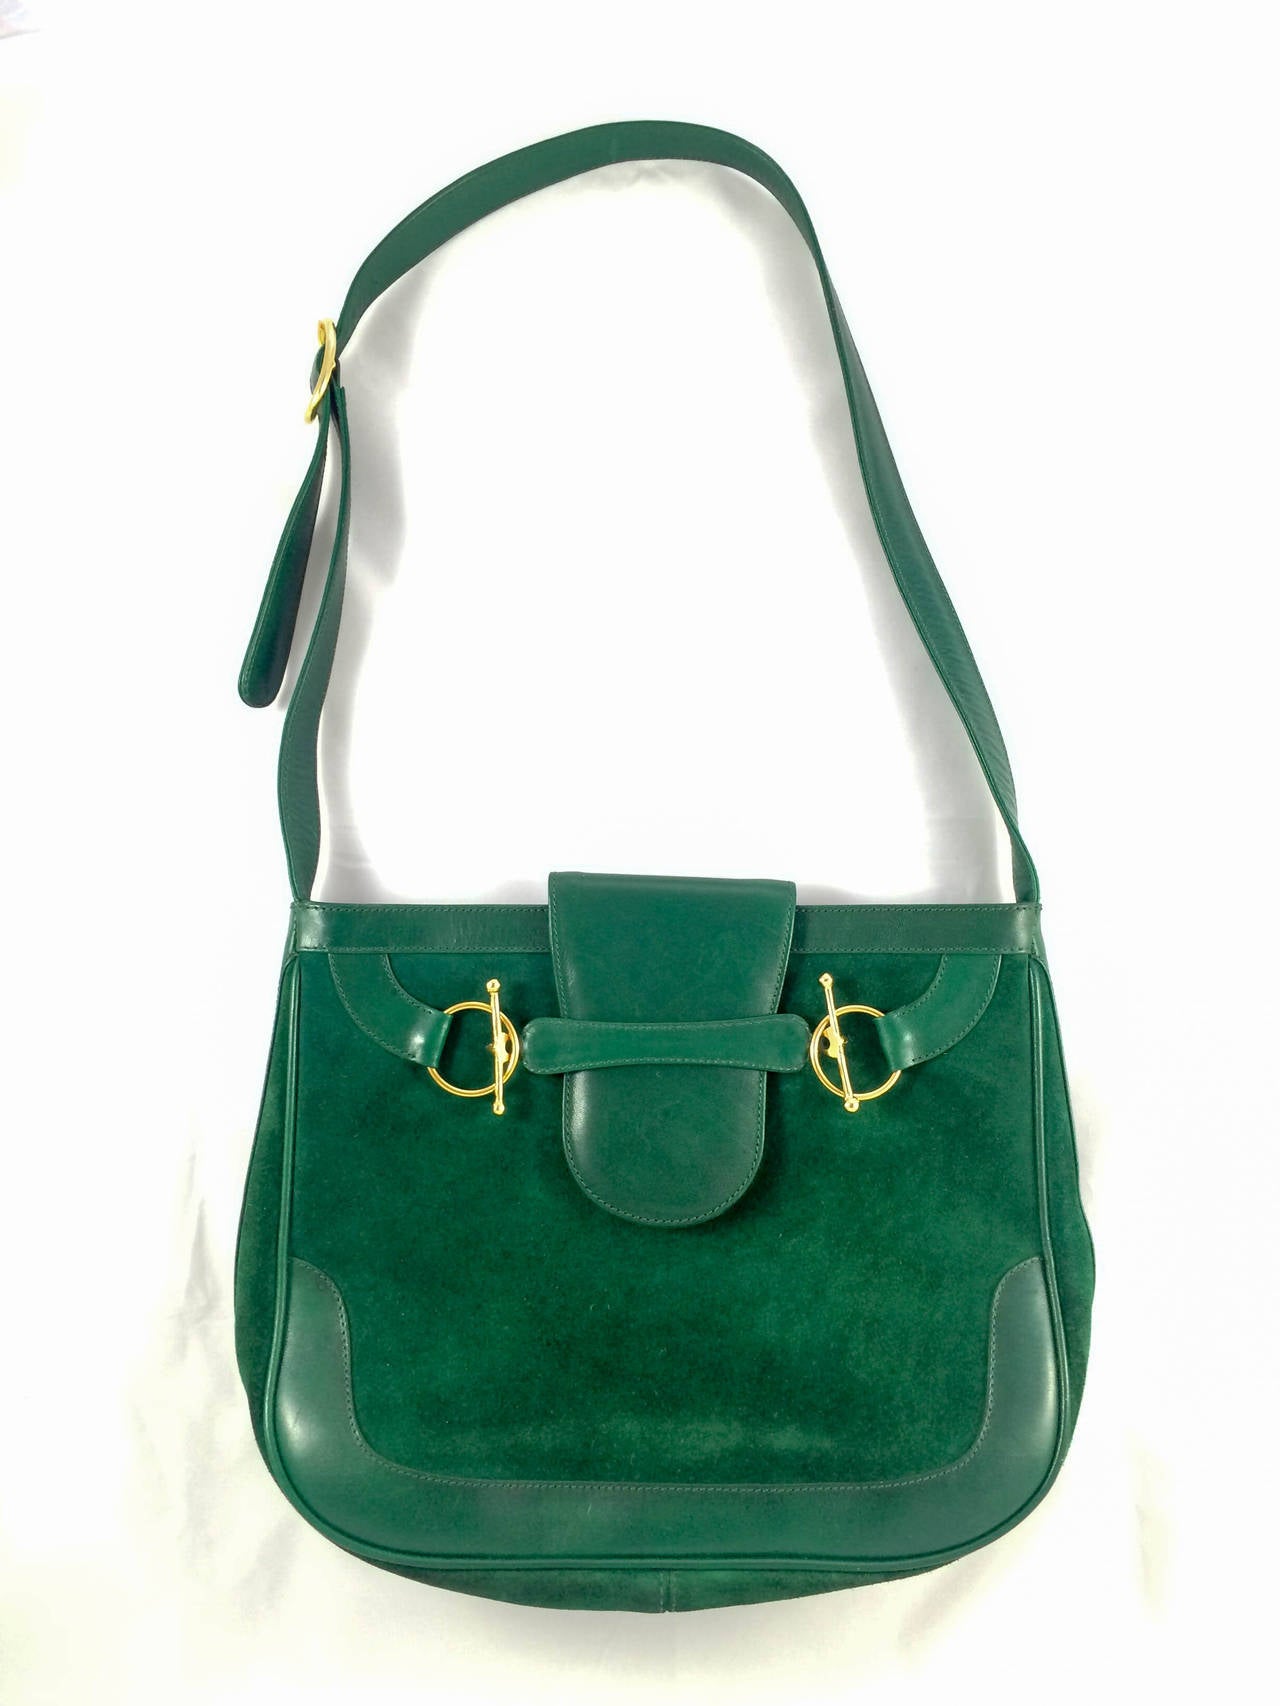 Super stylish Vintage Gucci Handbag. This stunning and rare Gucci design from the 1970s is made in the best quality suede and leather in beautiful emerald green. The interior is made of beige suede with one main compartment and a zipper pocket.